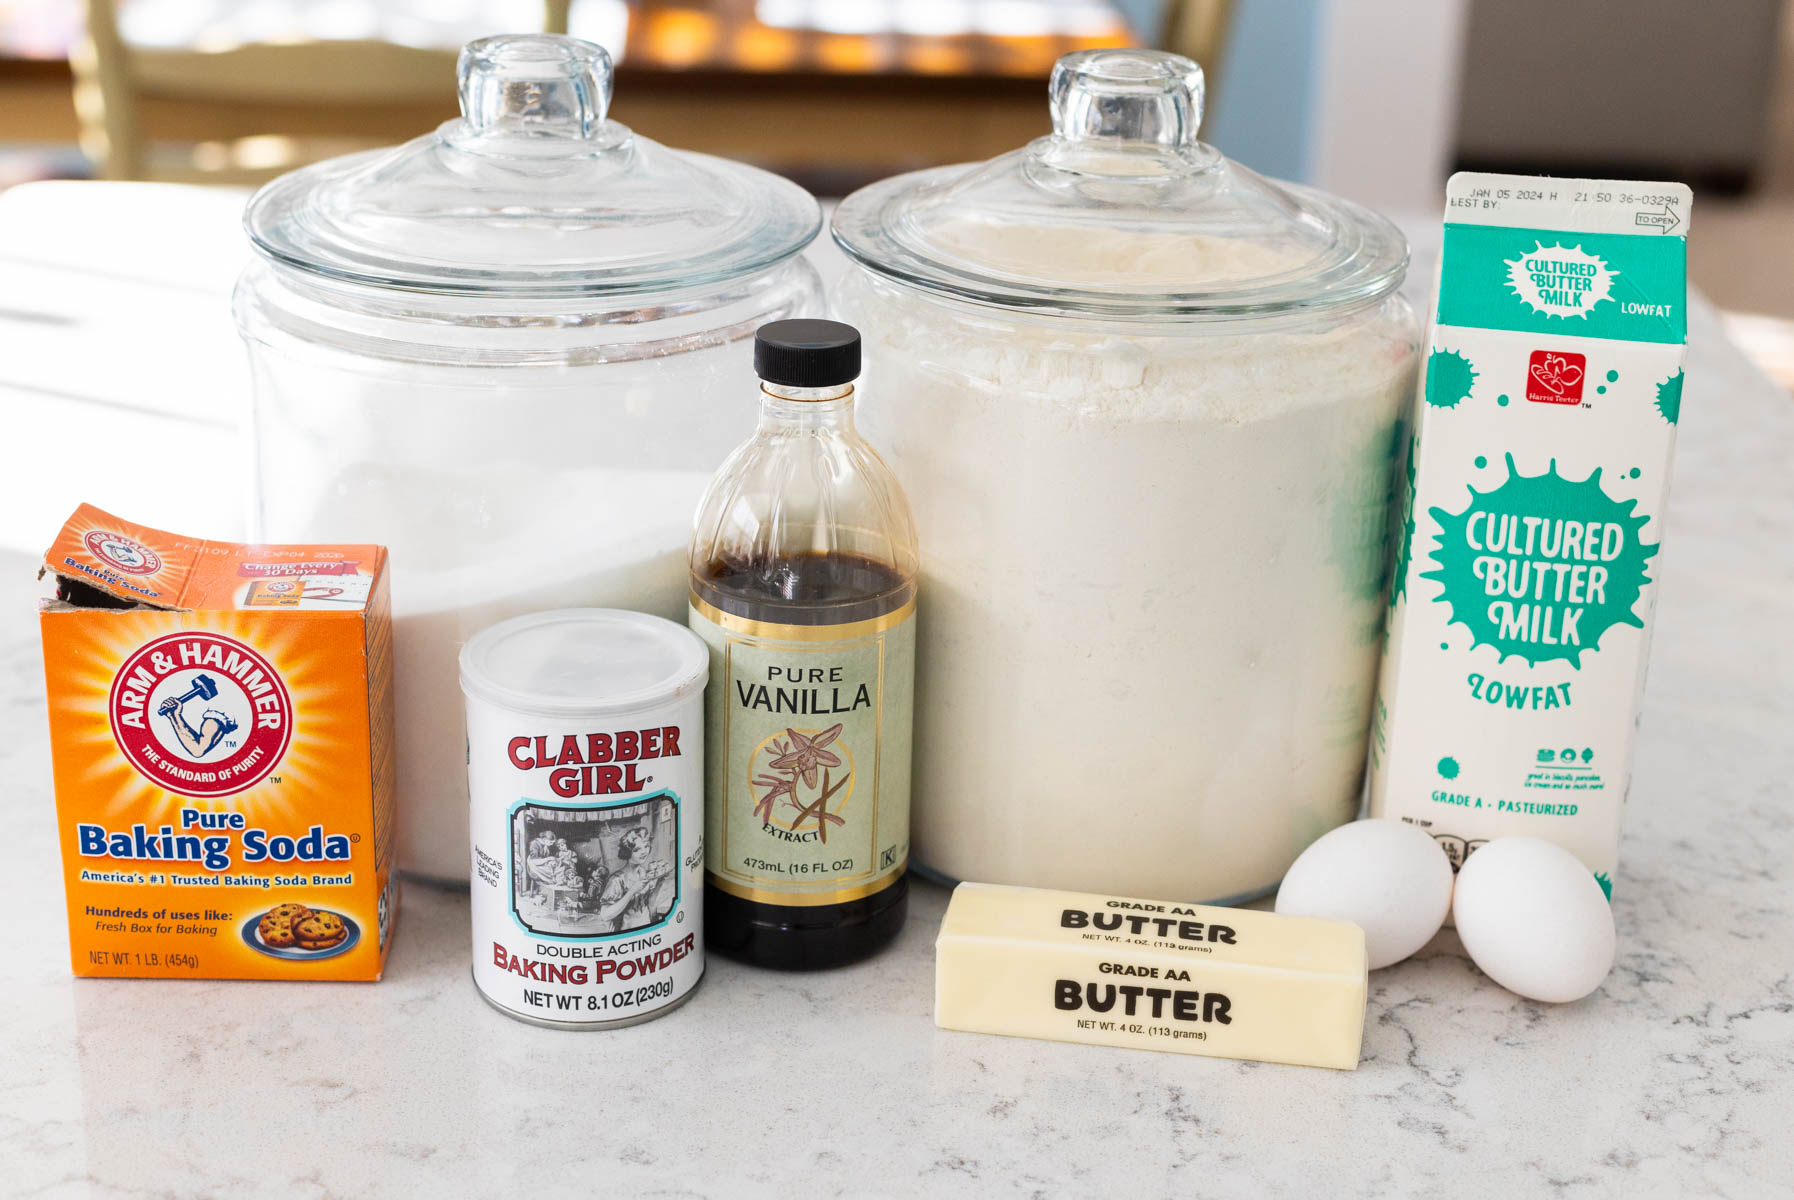 The ingredients to make buttermilk waffles are on the counter.